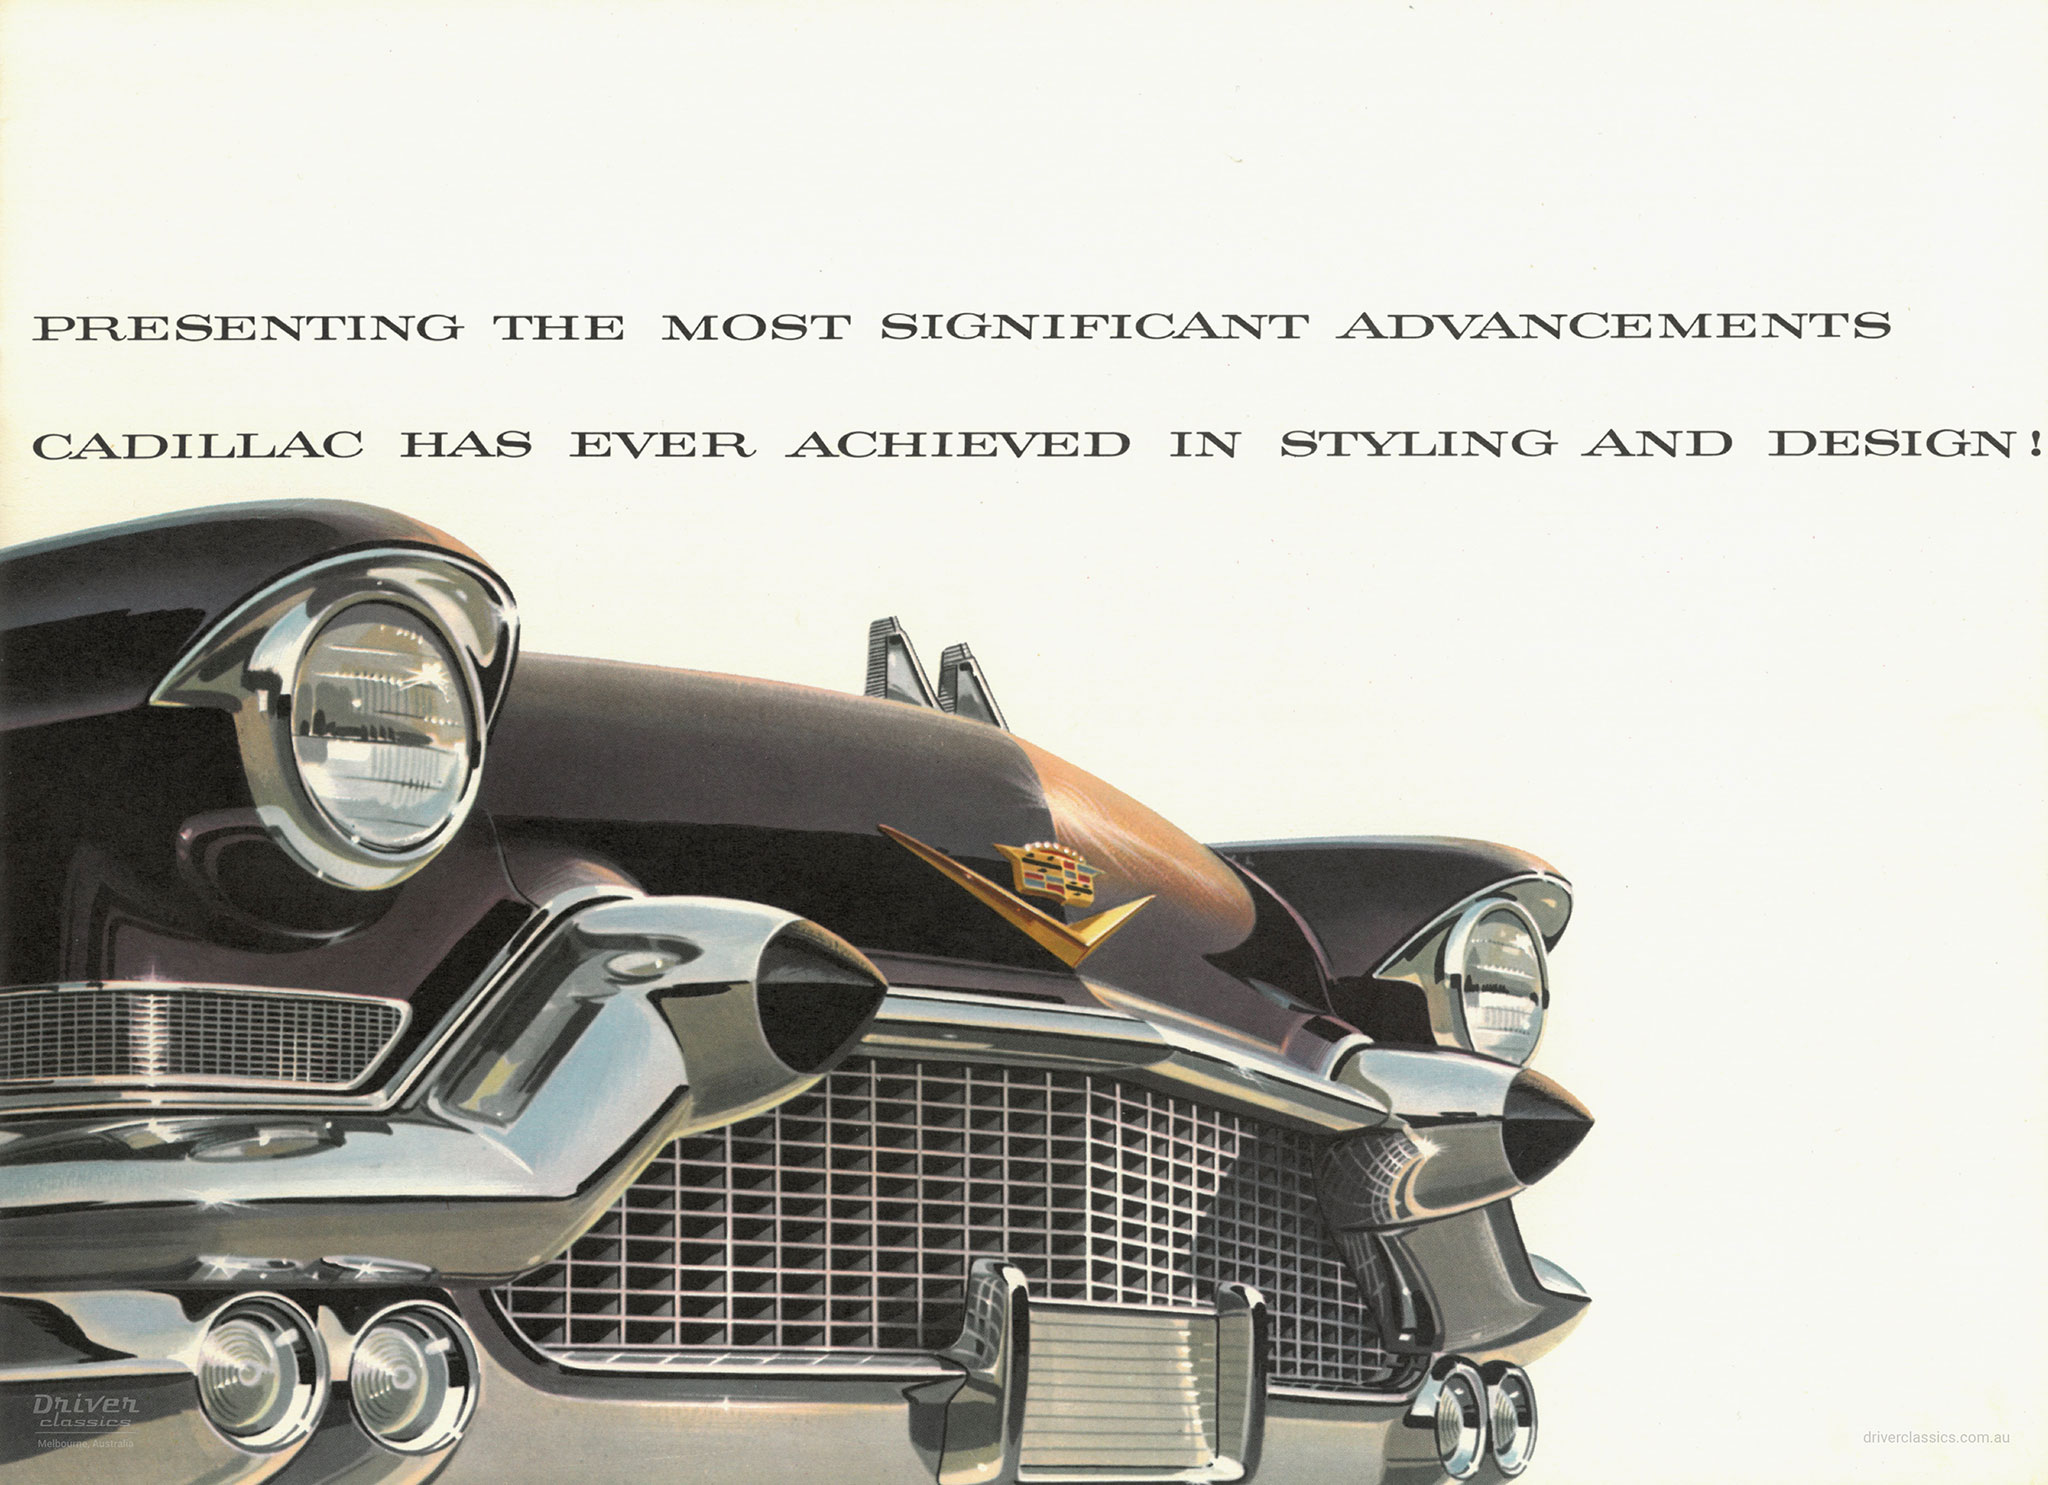 Cover from 1957 Cadillac brochure. Reads 